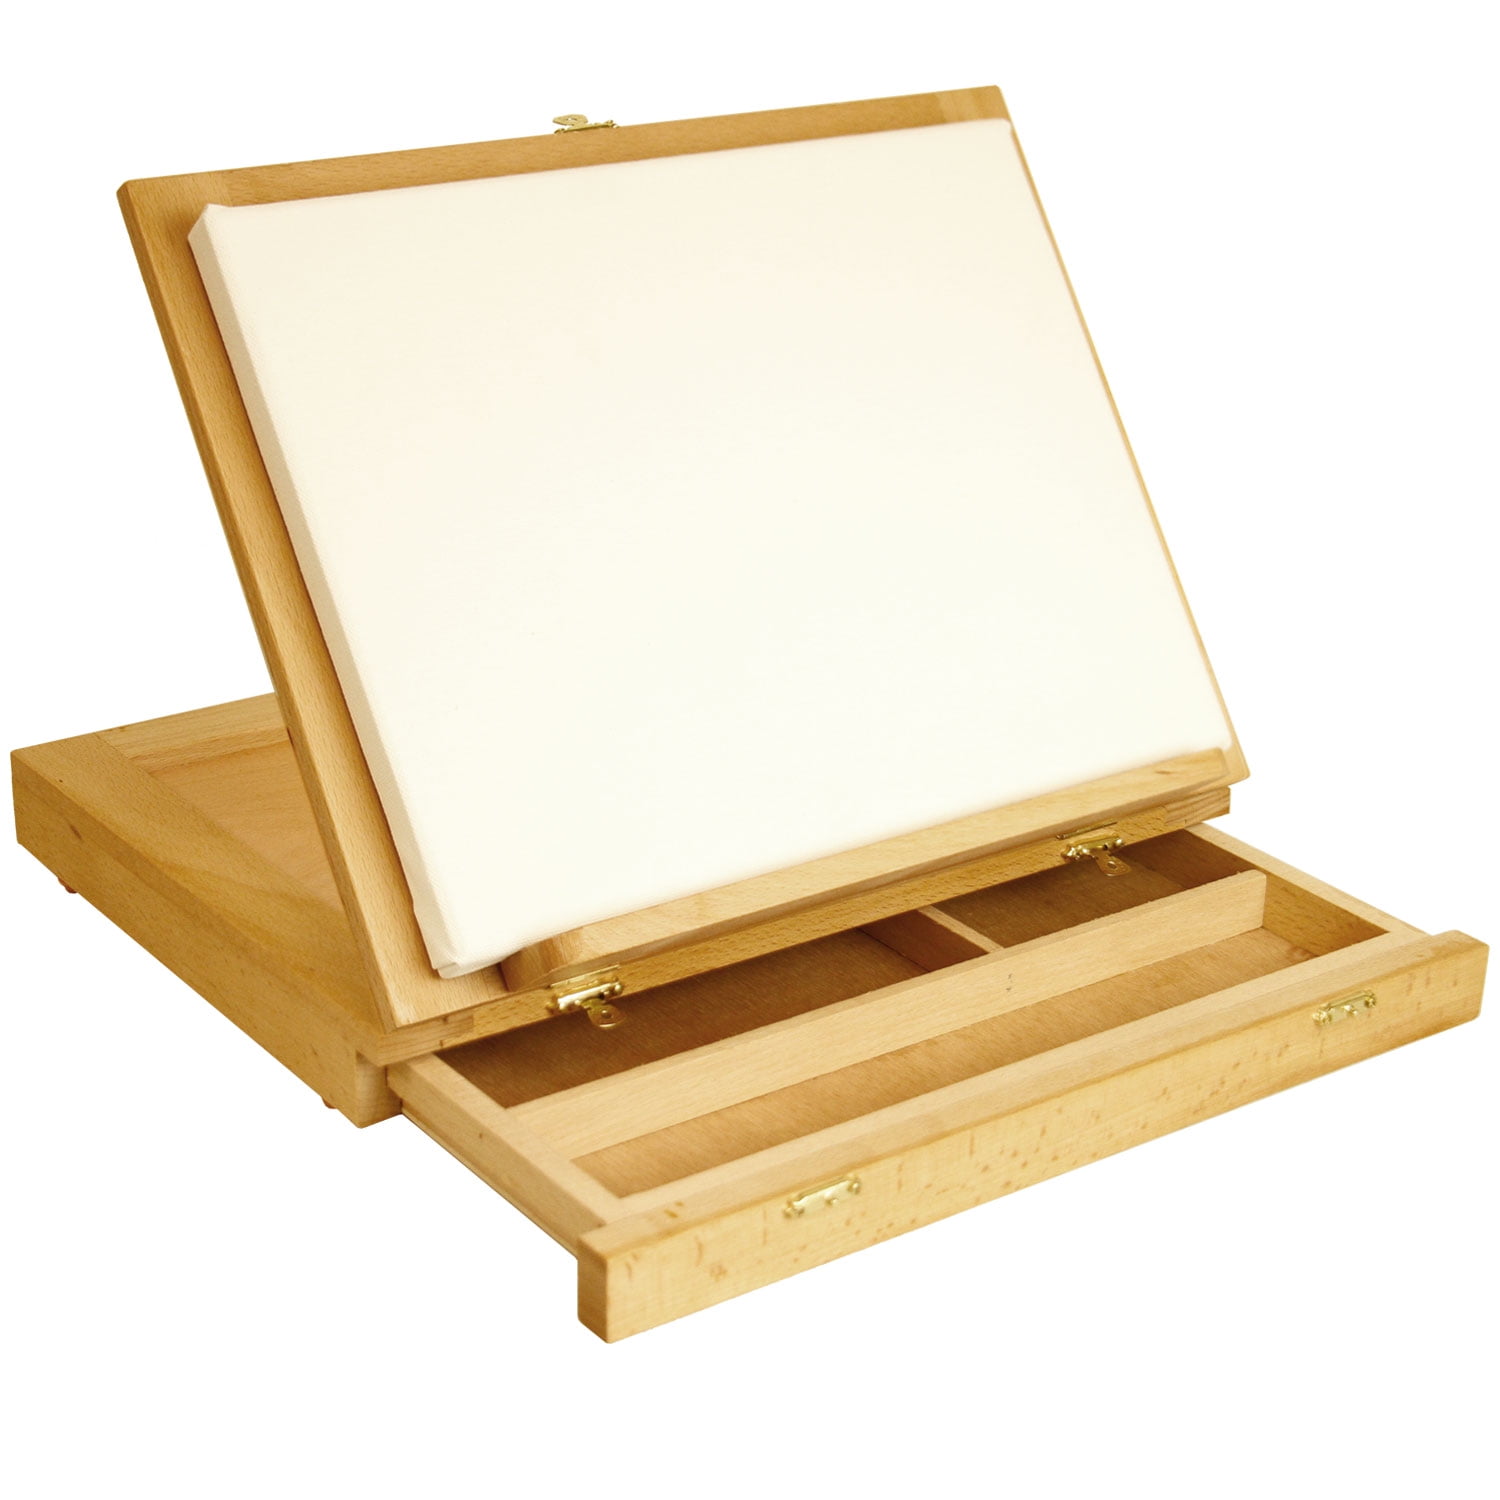 Us Art Supply Solana Adjustable Wood Desk Easel With Drawers